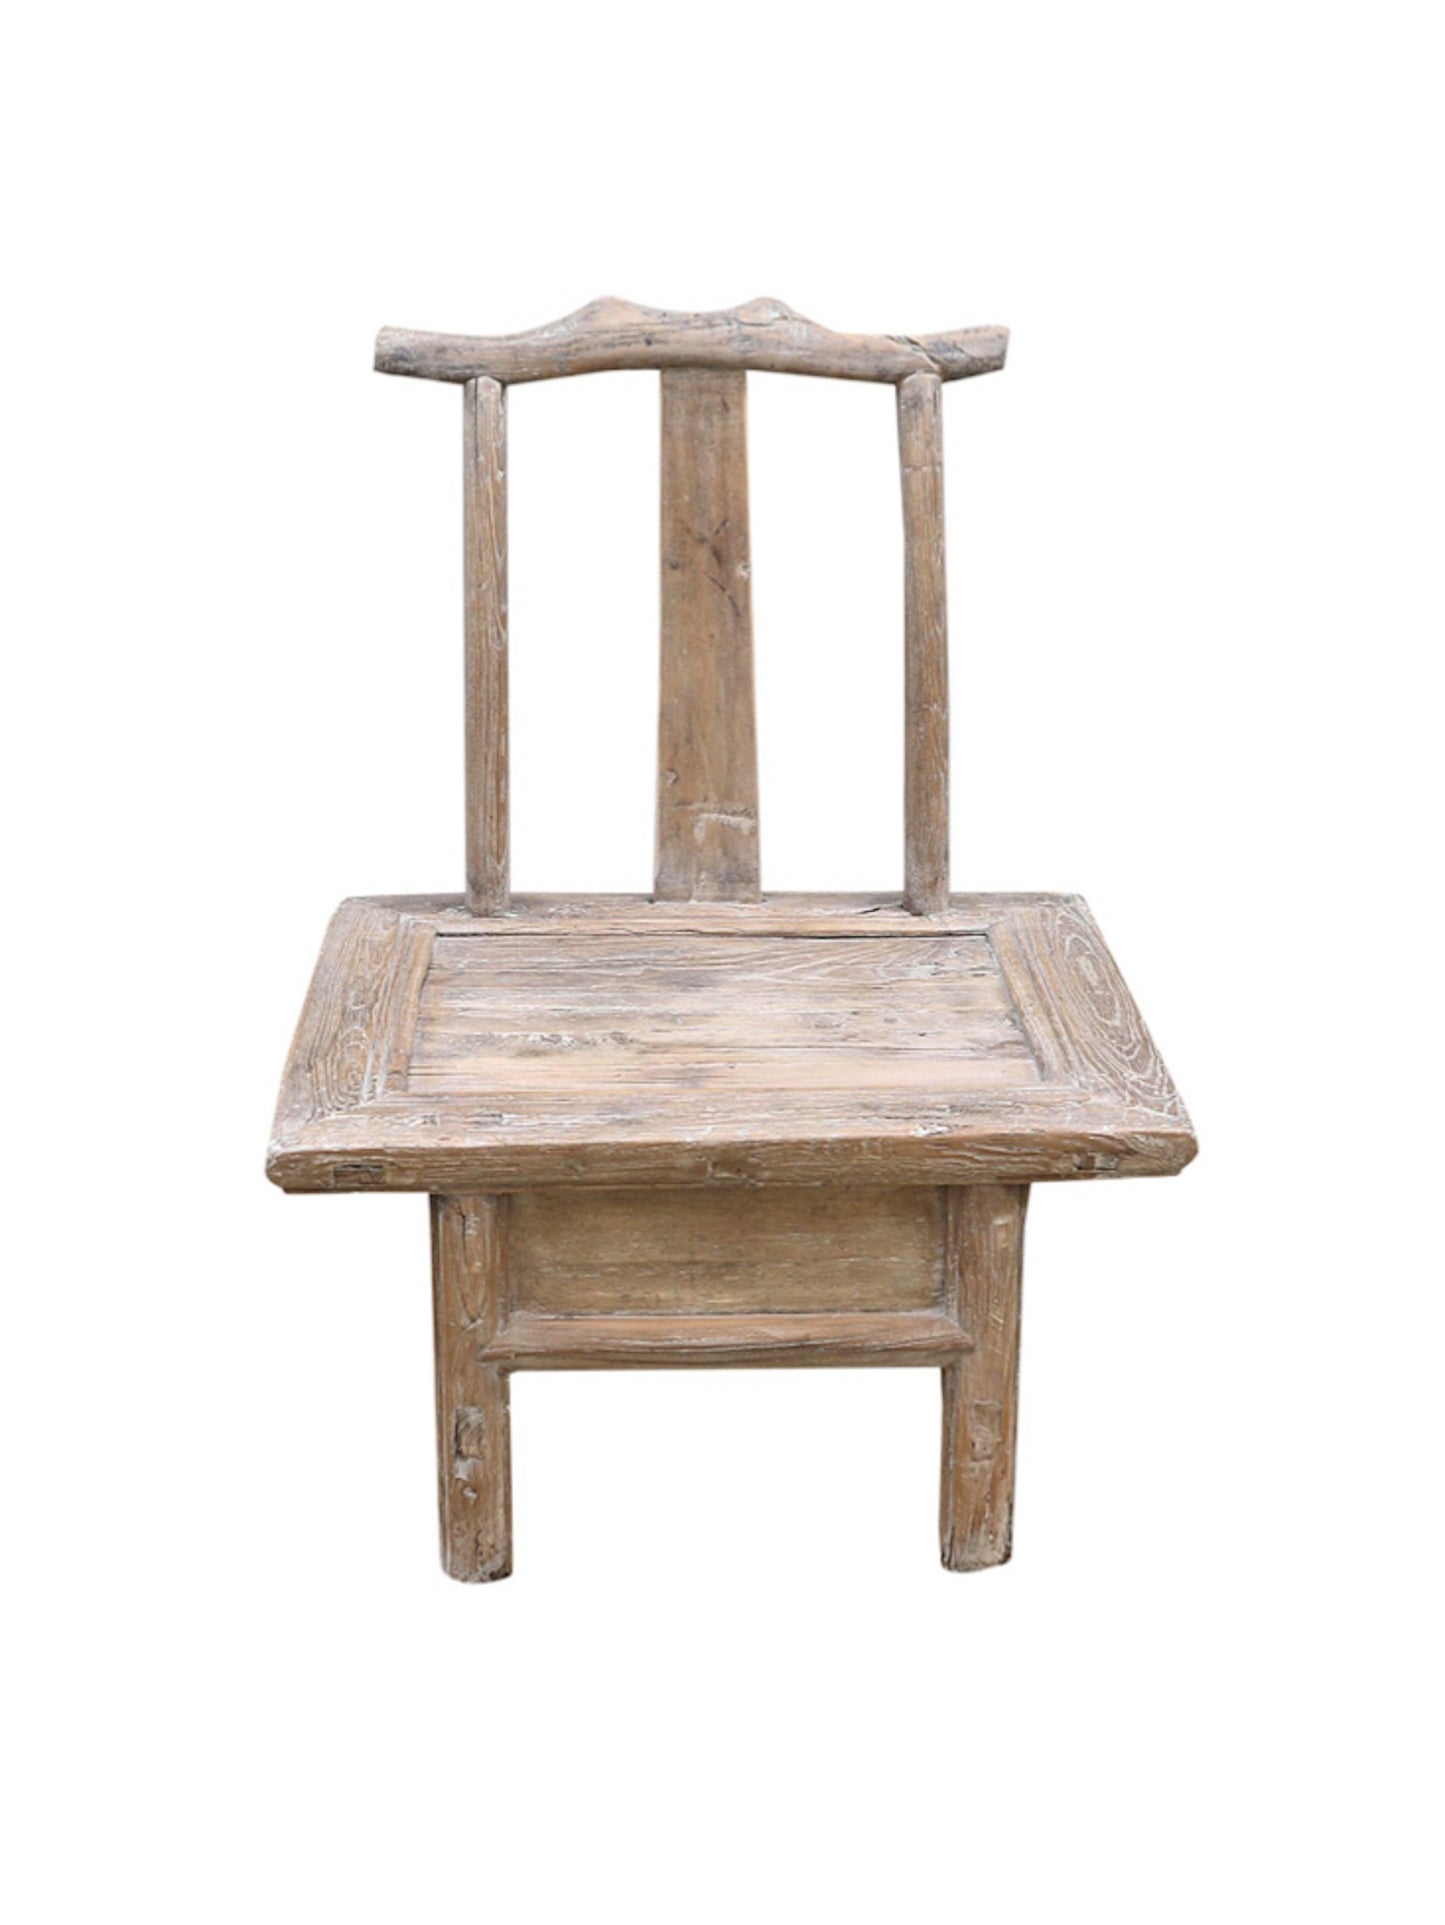 80 year old Chinese children's chair